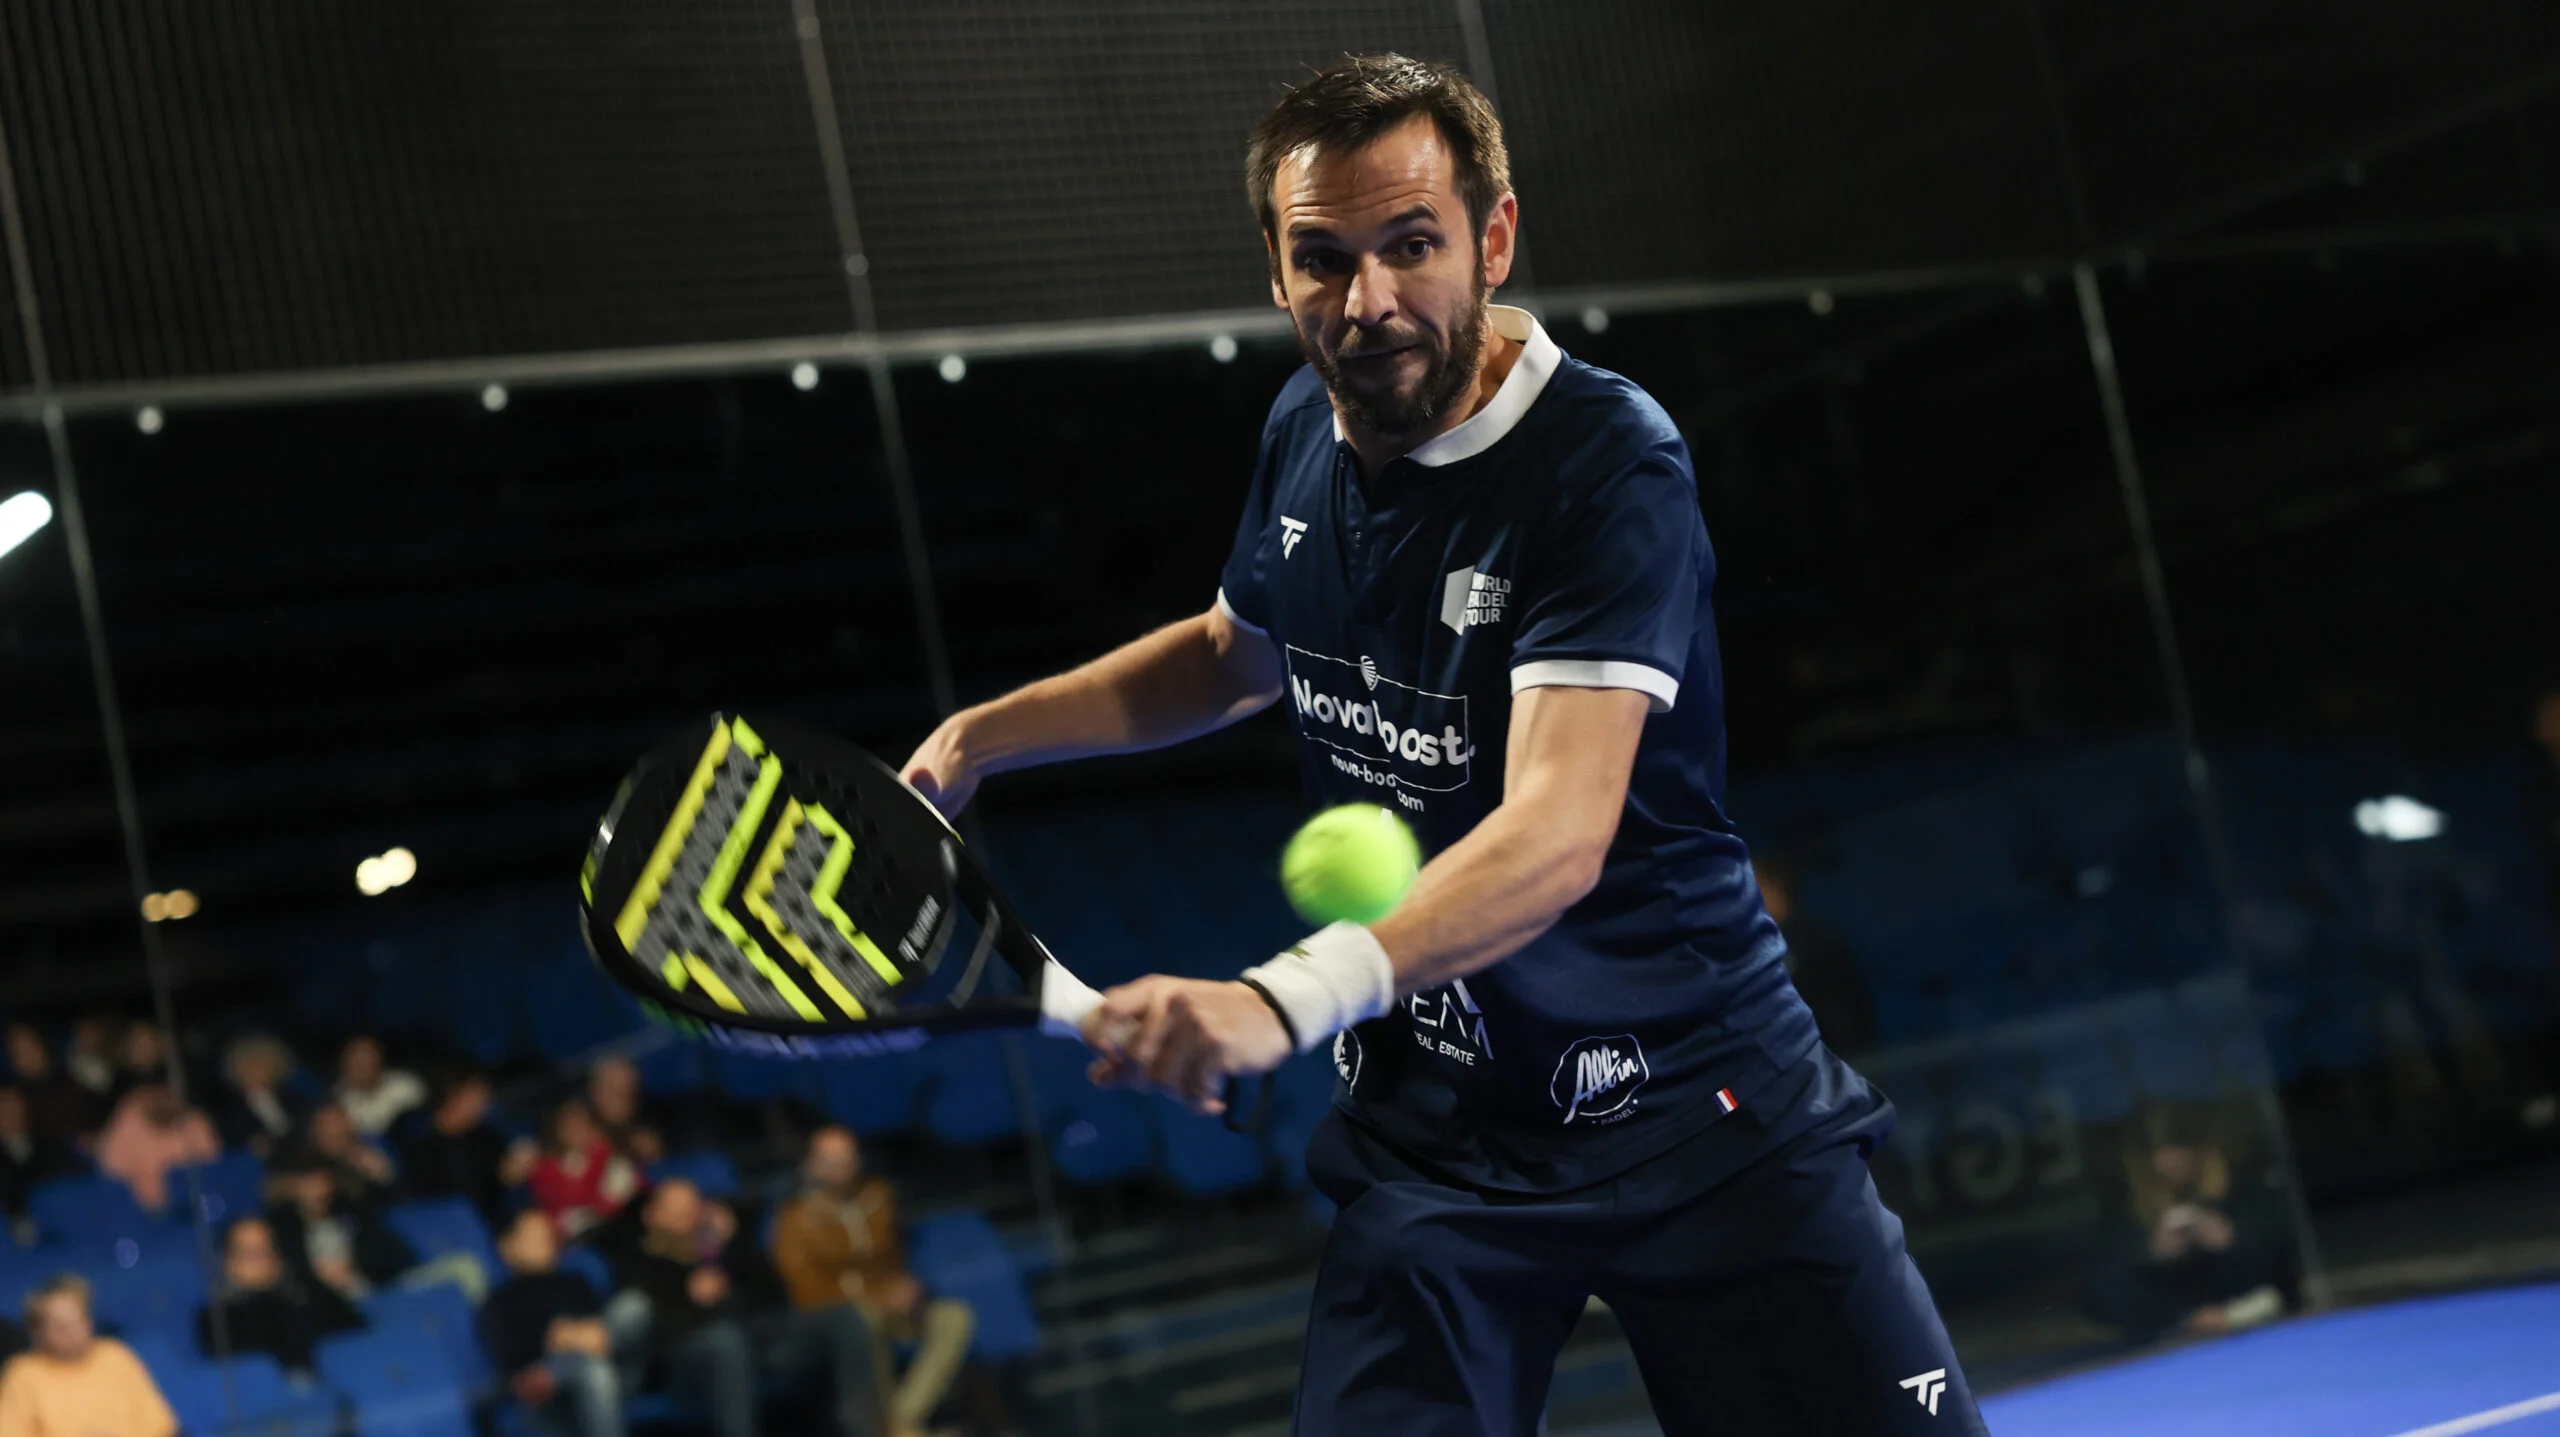 Ben Tison: “Be responsible for the high level padel, it’s accepting the end of the France team for me”